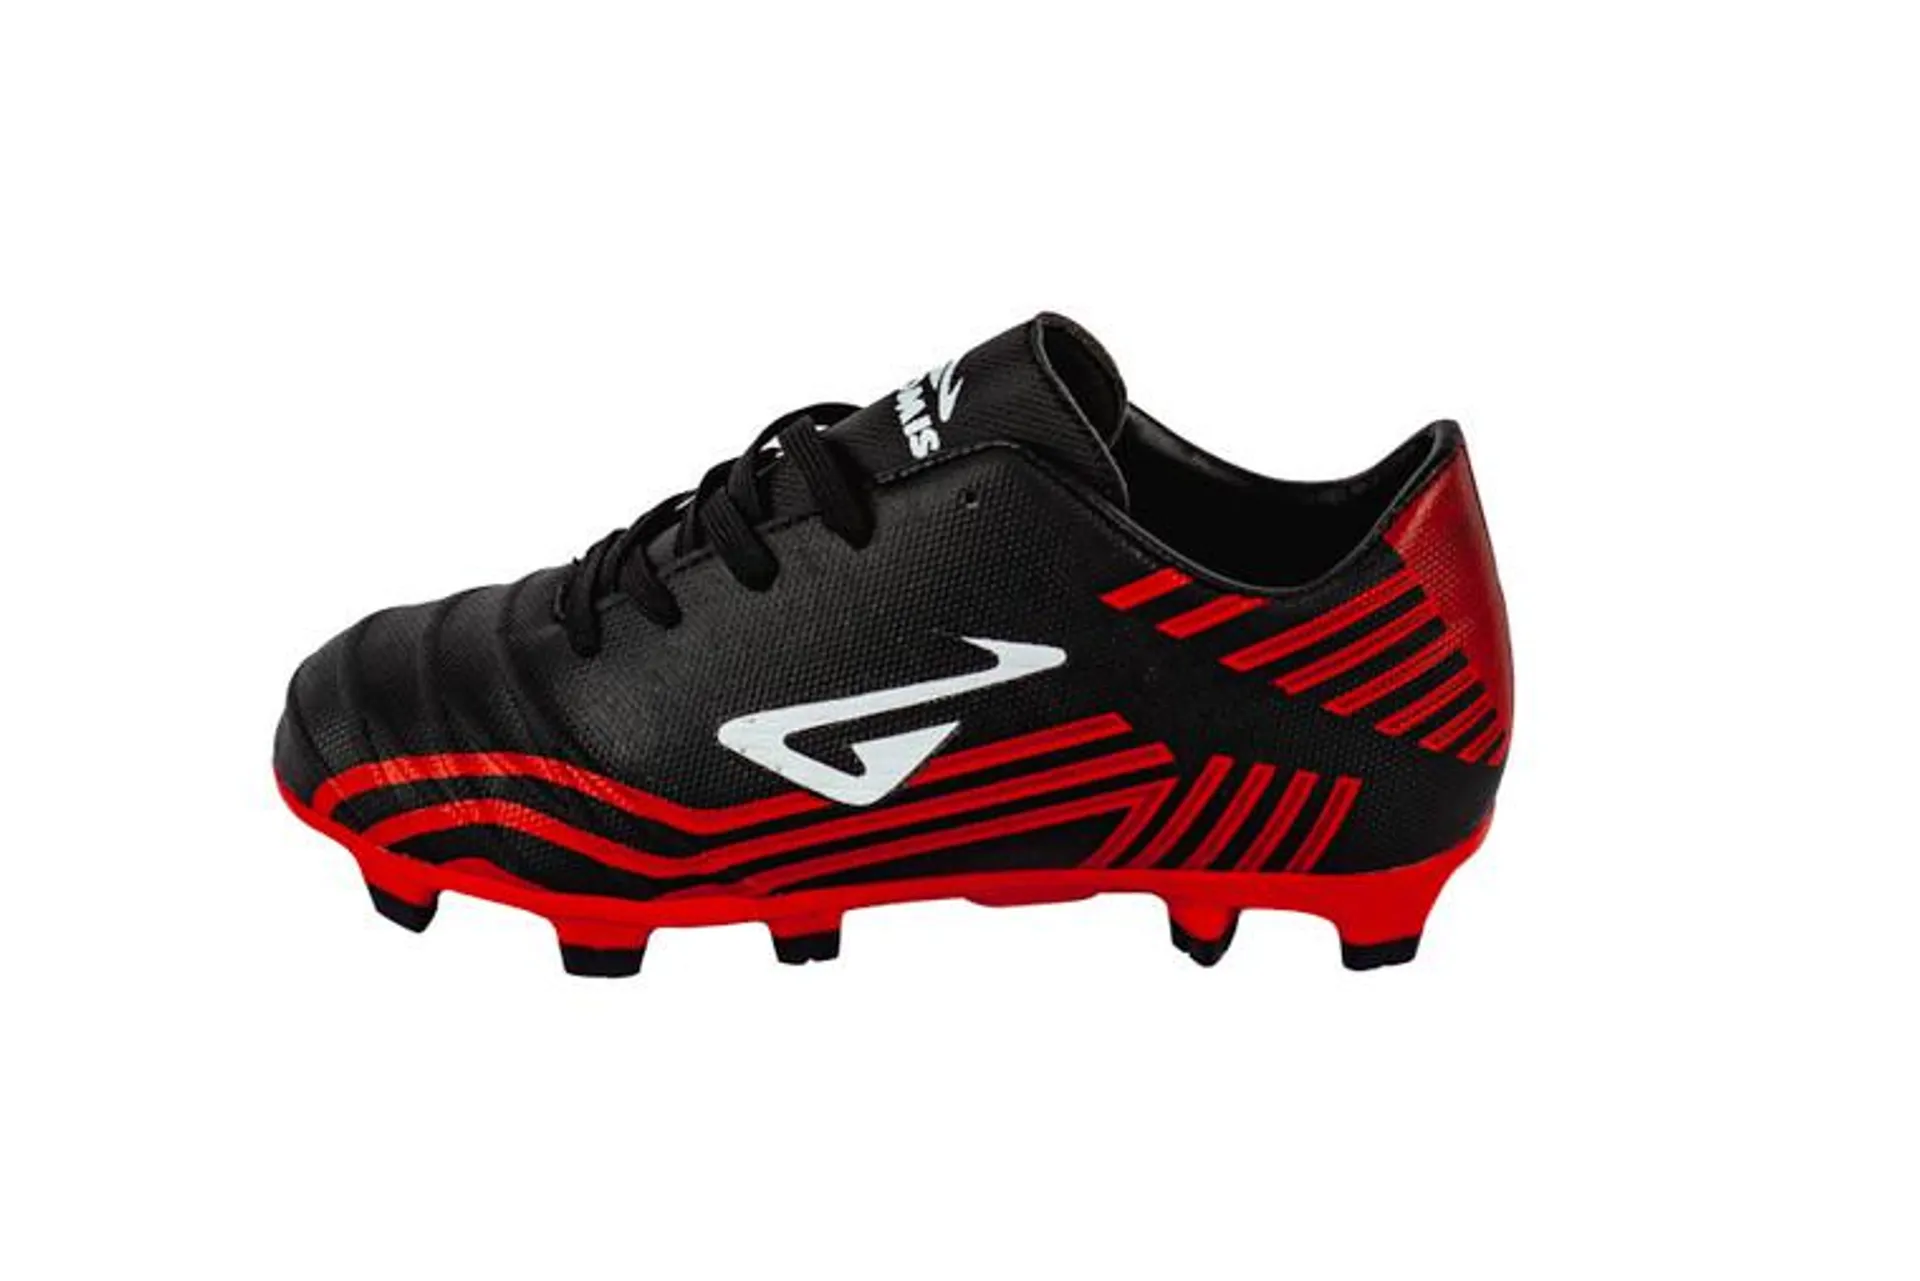 Nomis Youth Prodigy Firm Ground Boots Black/Red